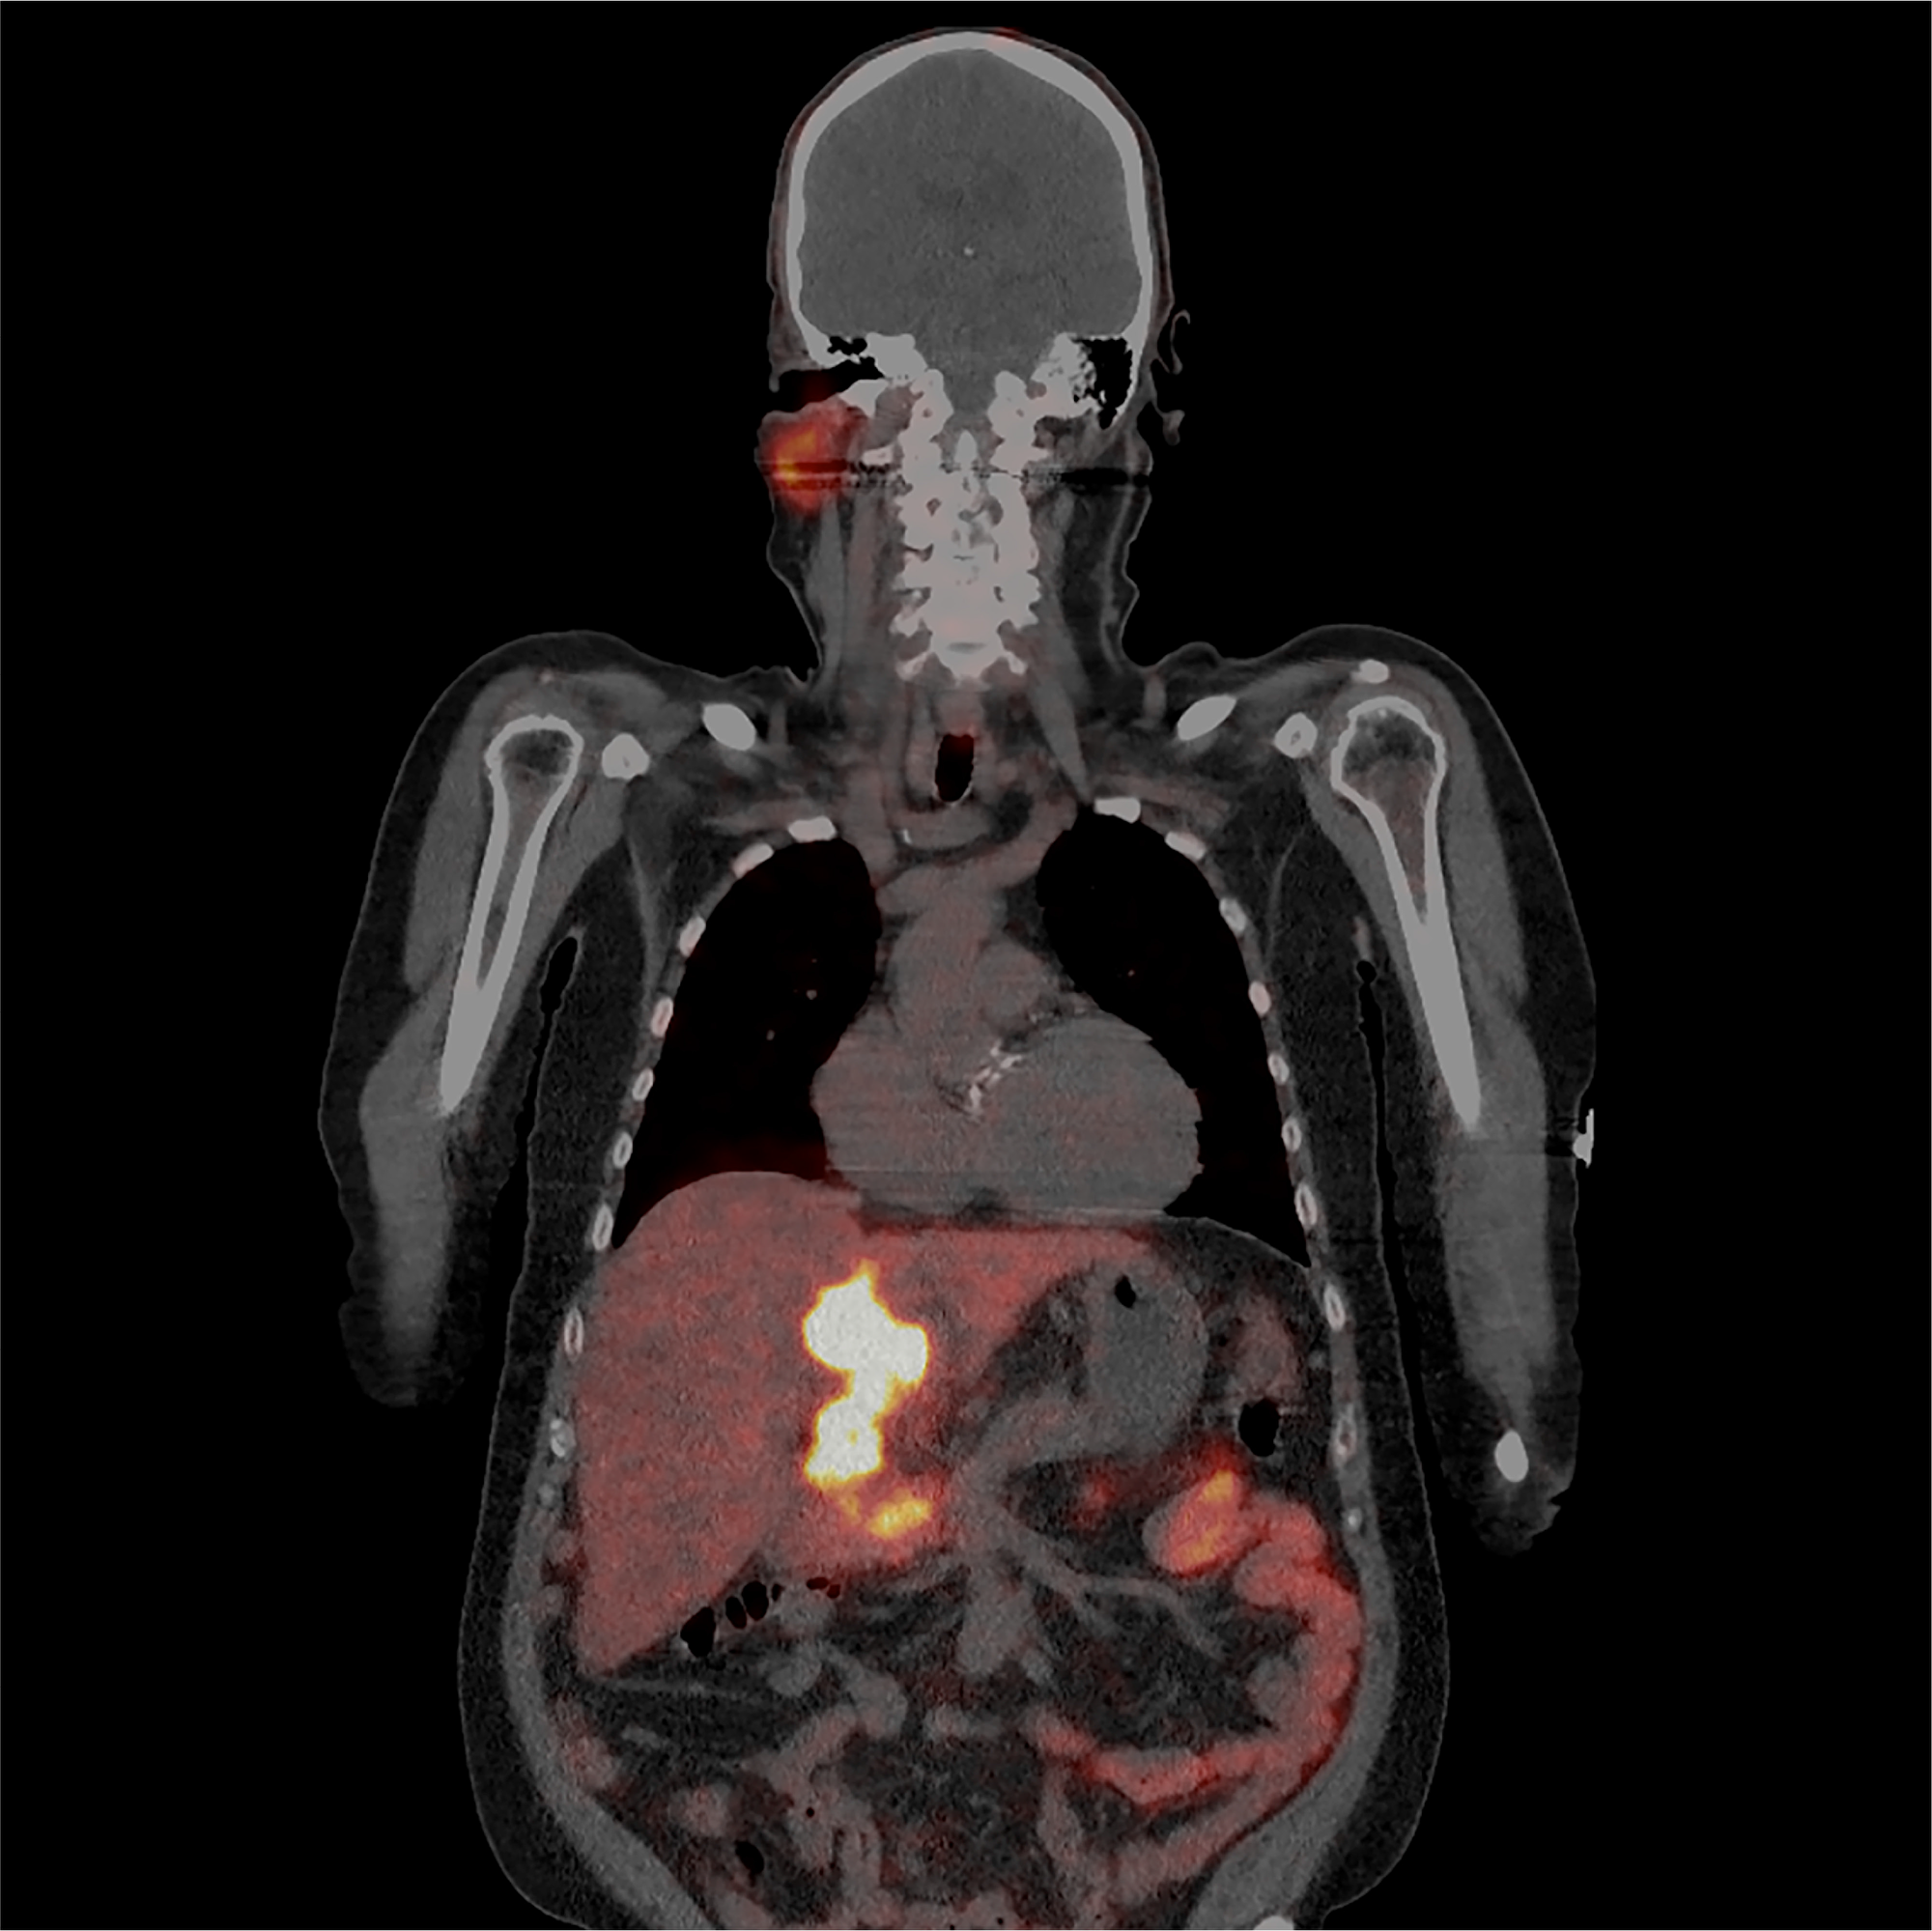 A 62-year-old patient with liver cirrhosis was diagnosed with HCC in 2015.